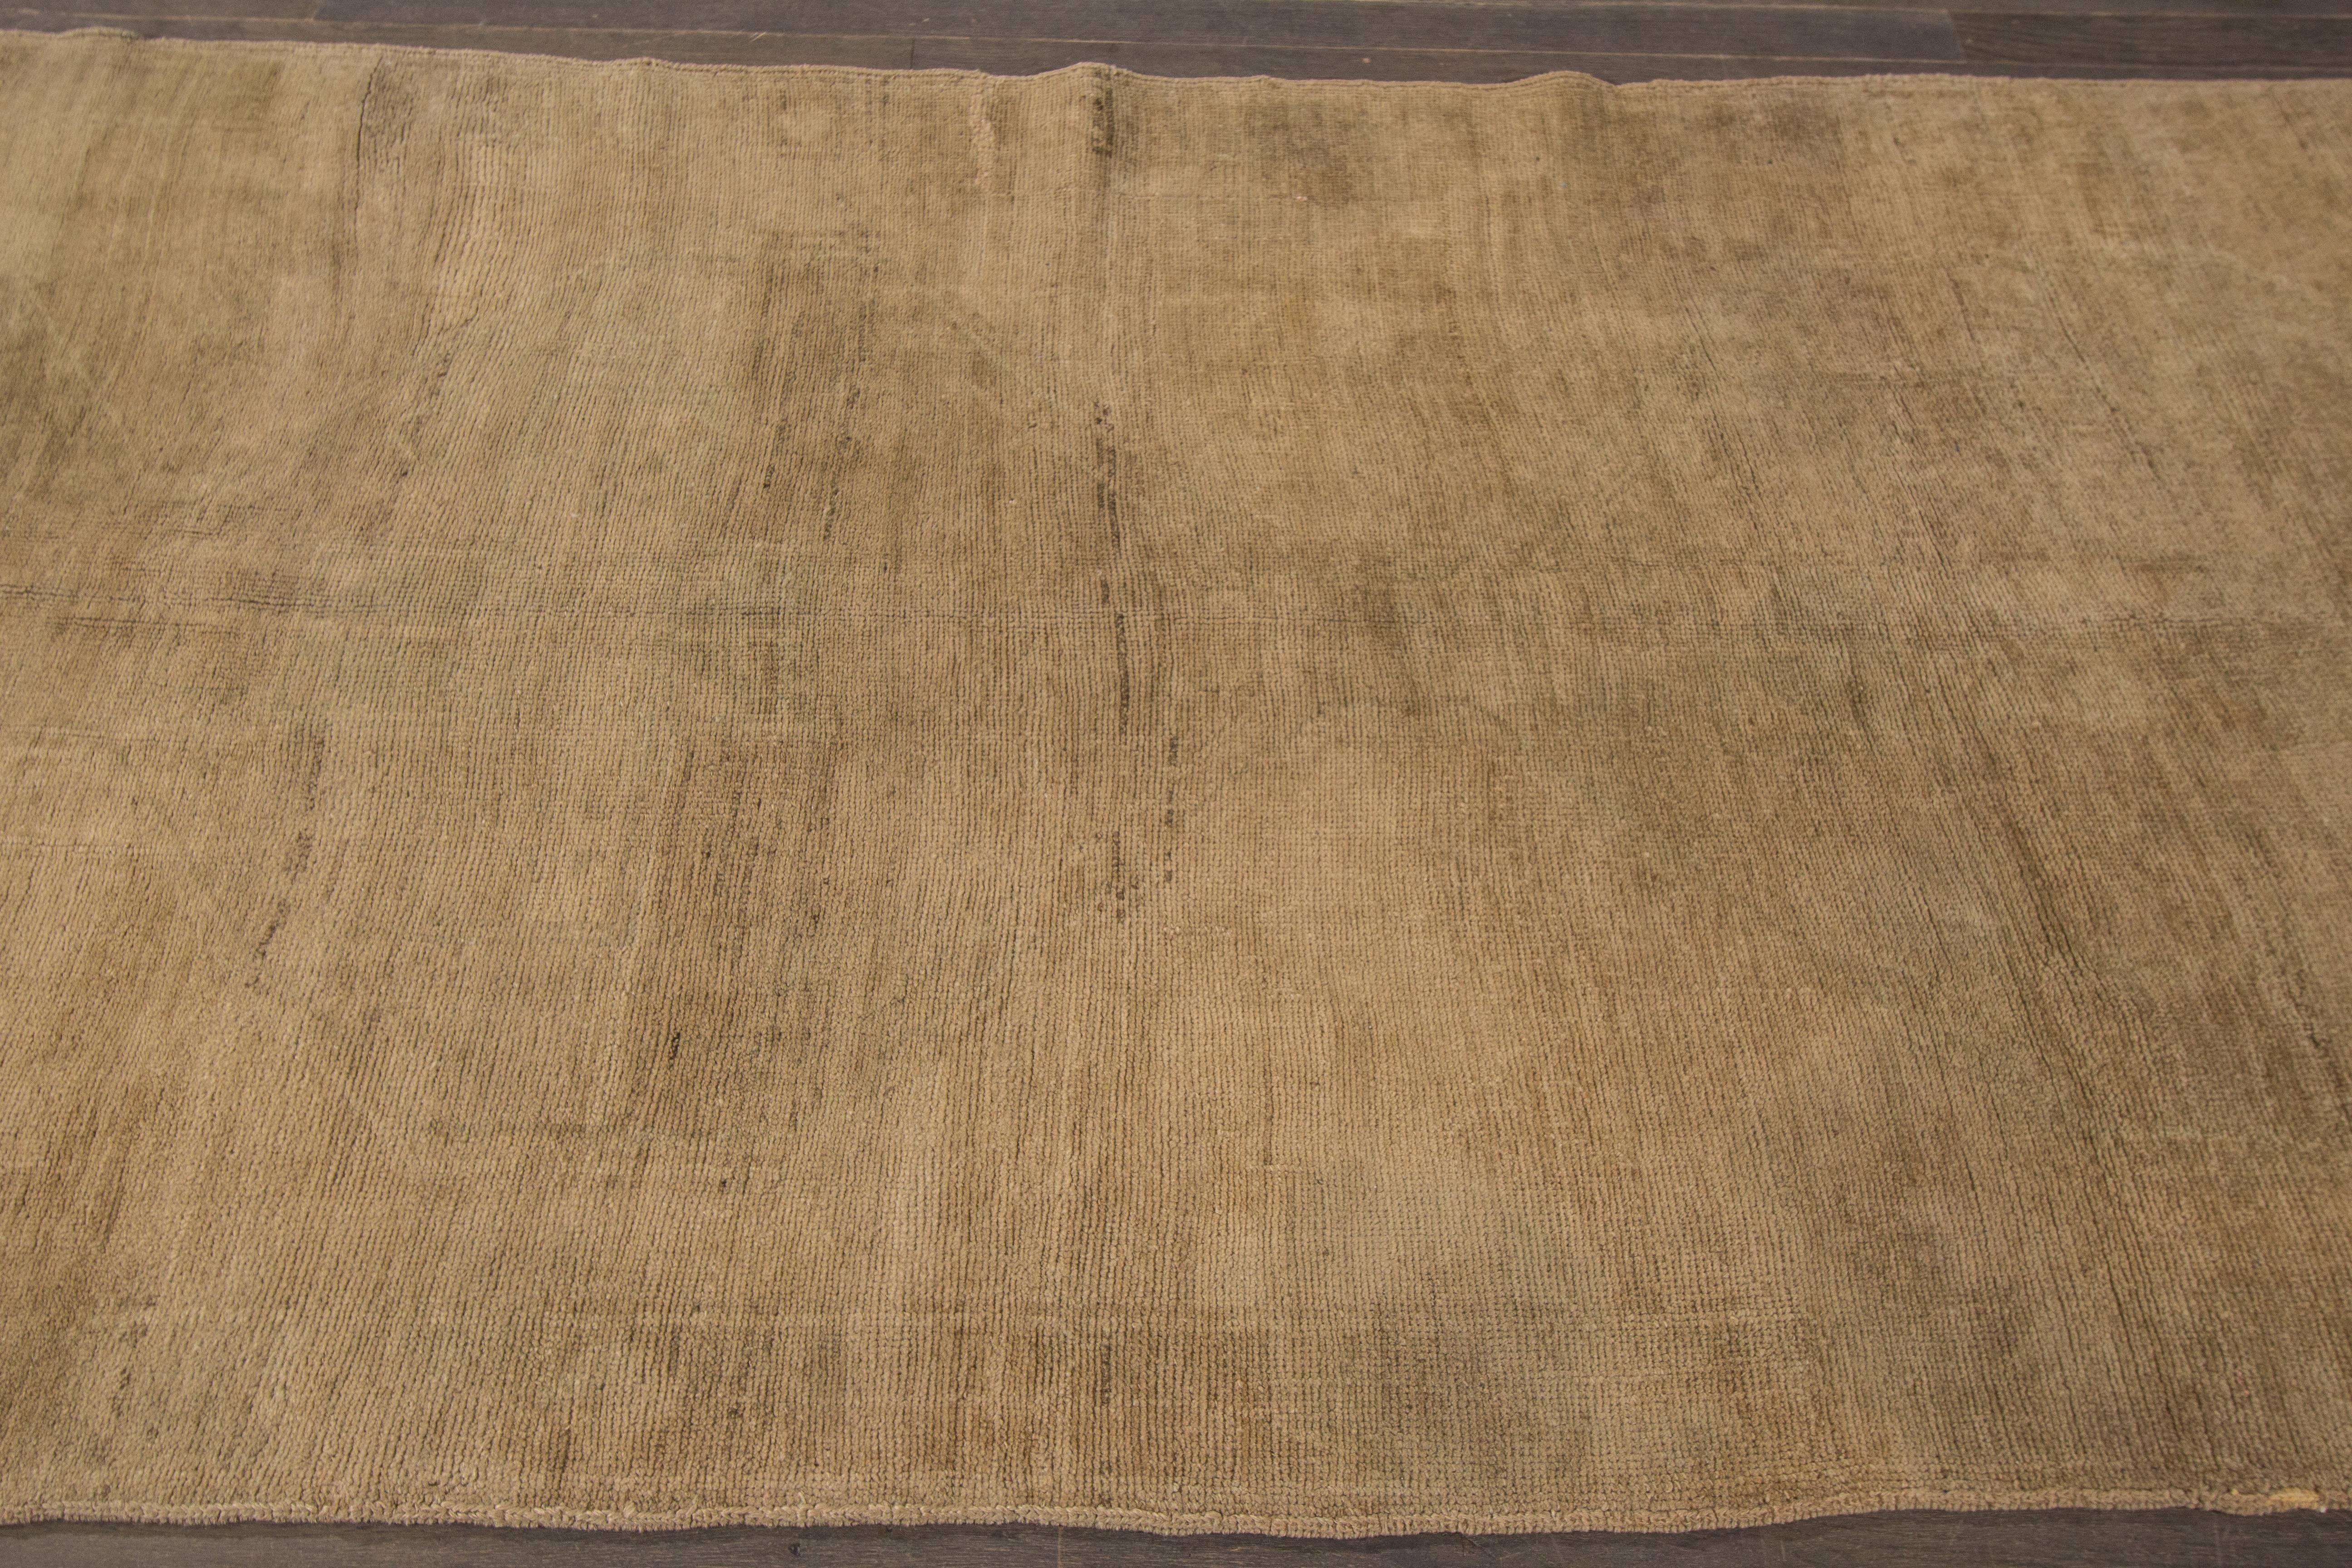 A hand-knotted antique Khotan rug with a subtle geometric design on a beige field. The size of this piece is 5' x 11'.7.